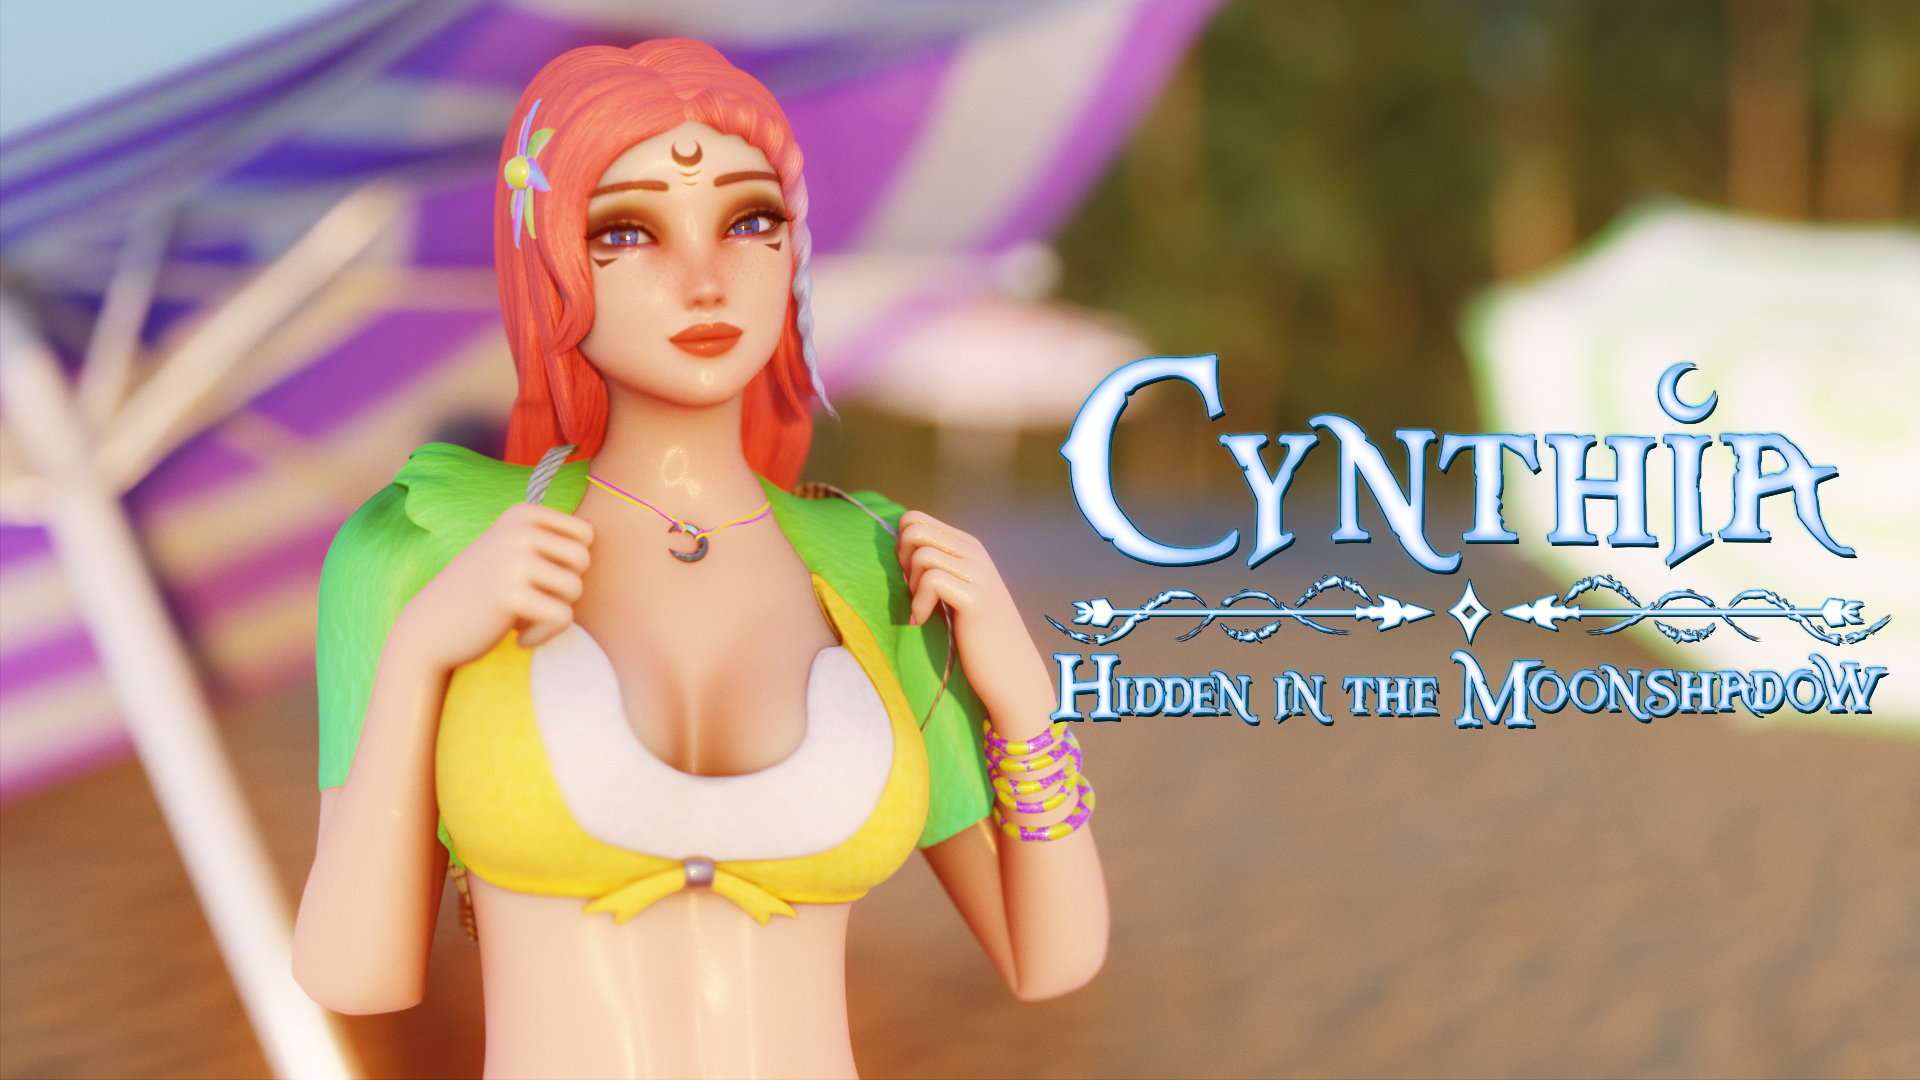 Cynthia: Hidden in the Moonshadow - 'Tropical Blossom' Costume